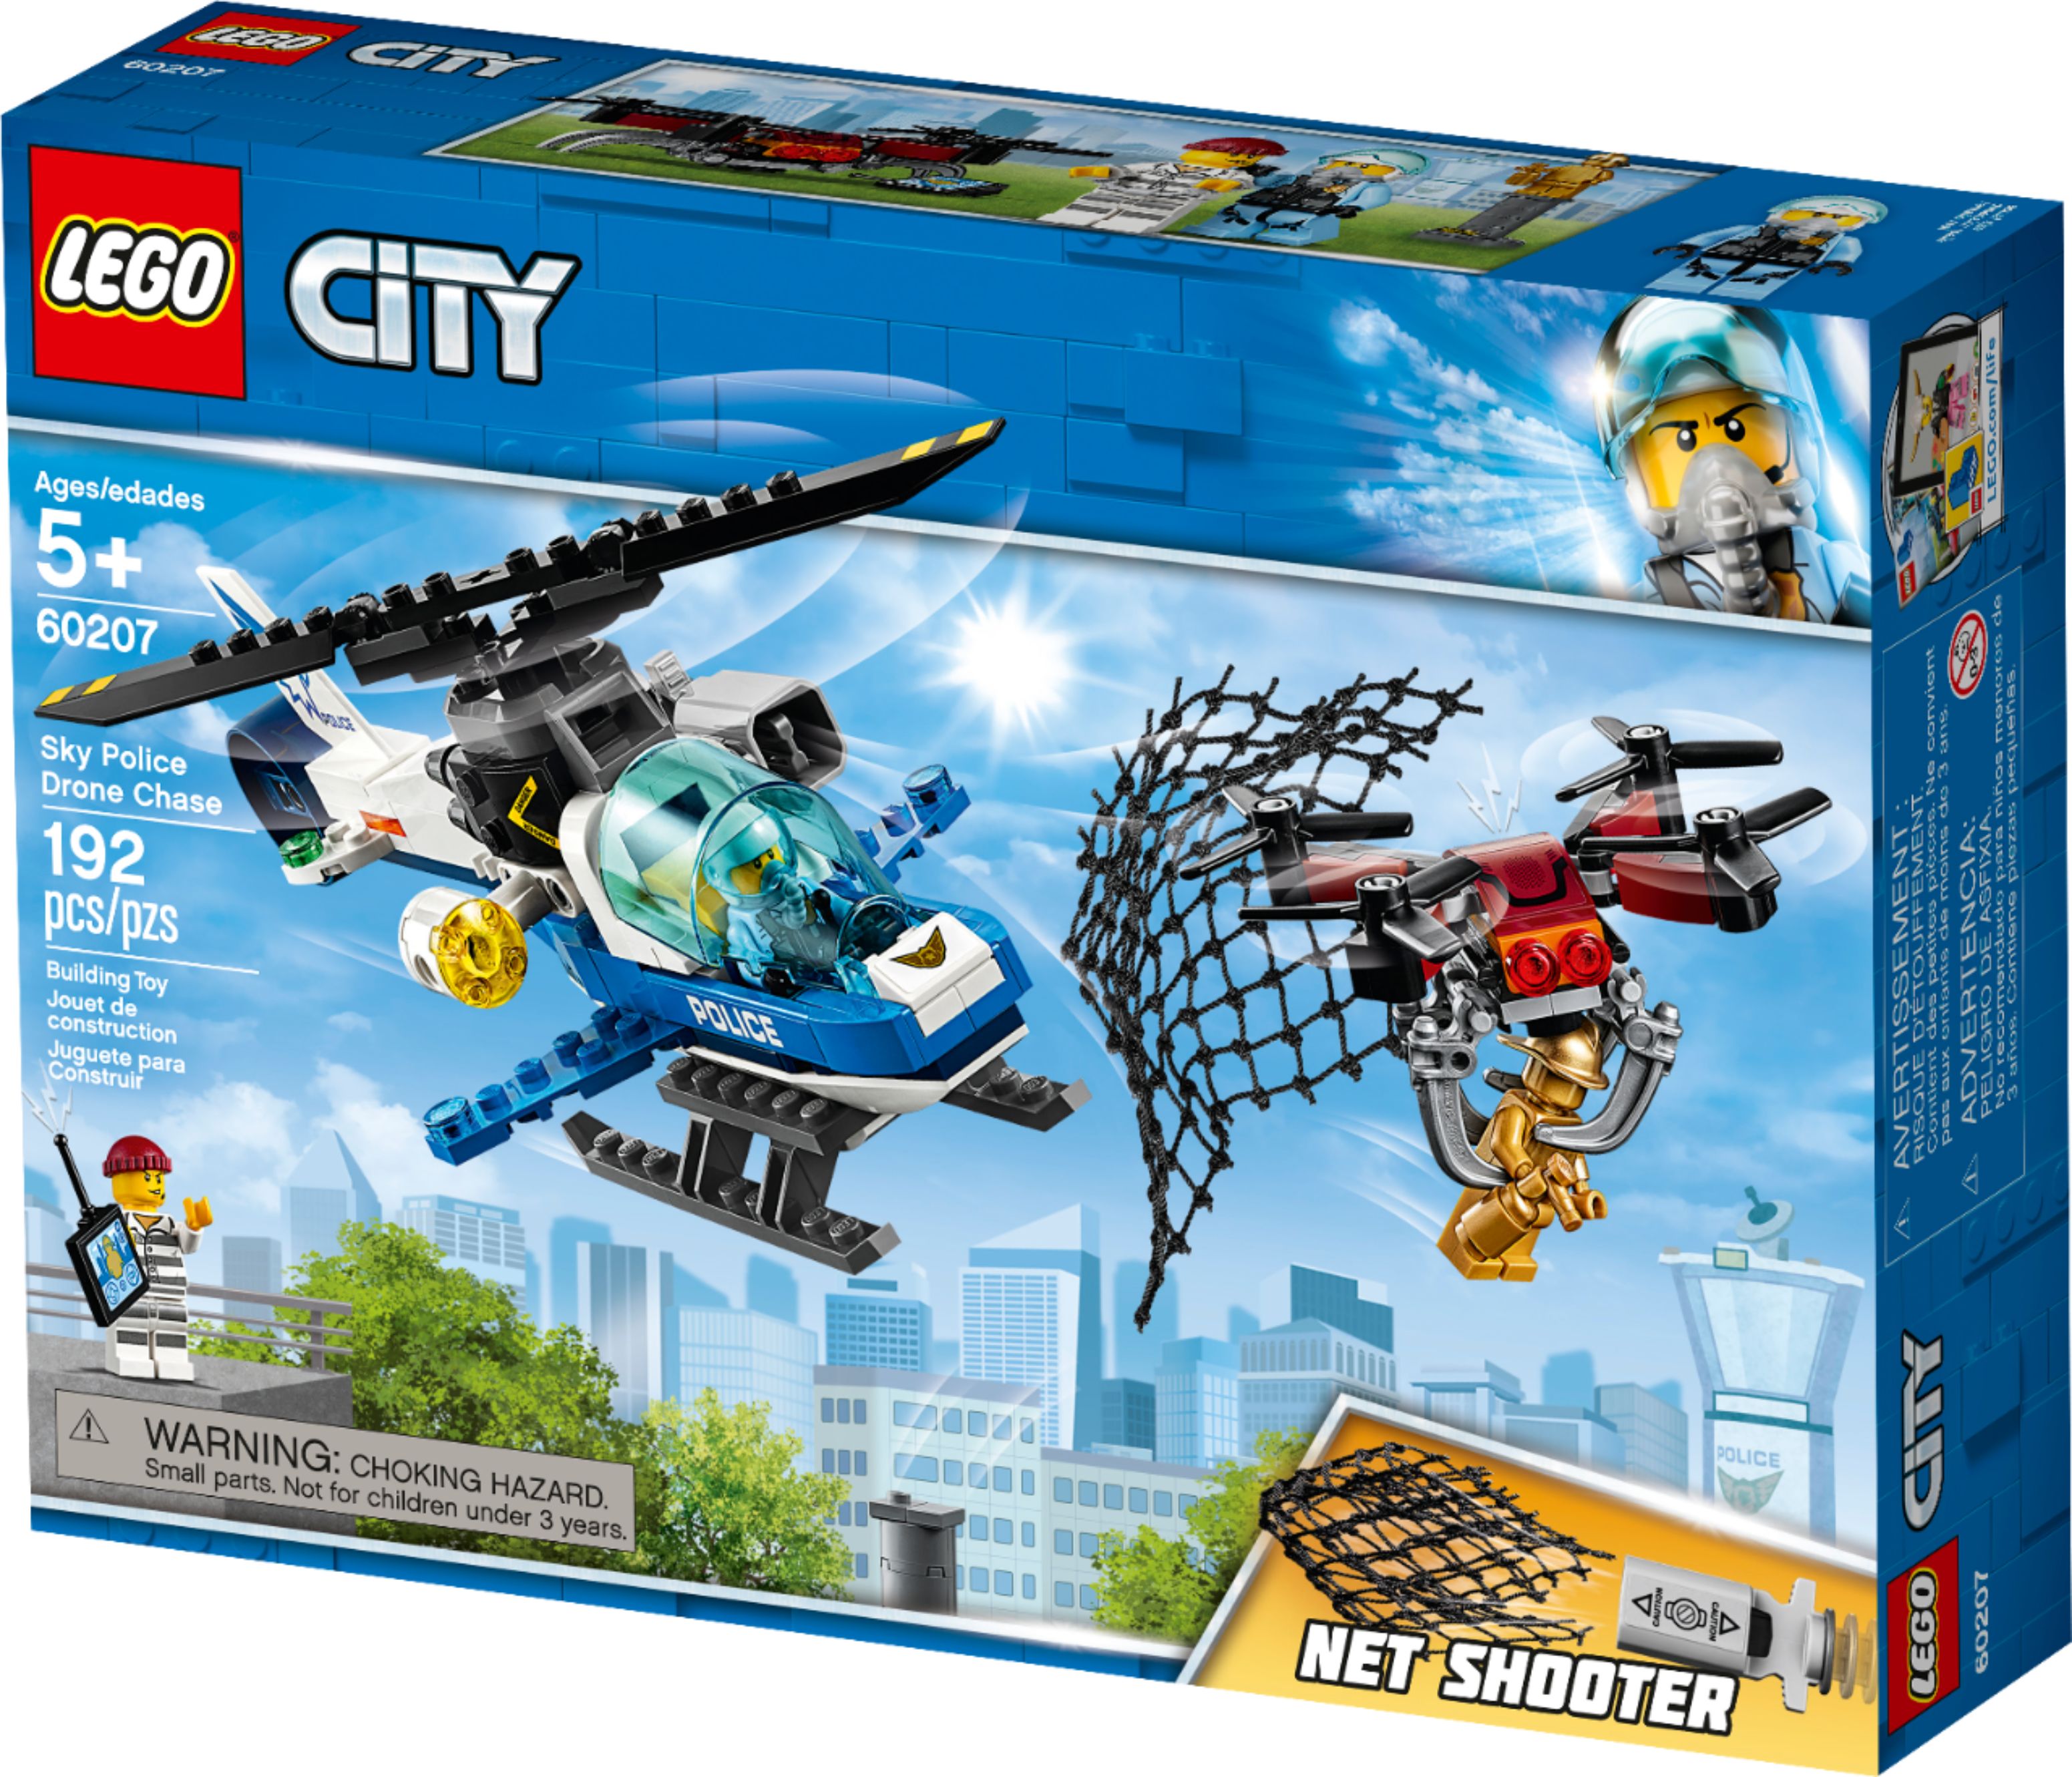 192 Pieces LEGO City Sky Police Drone Chase 60207 Building Kit 